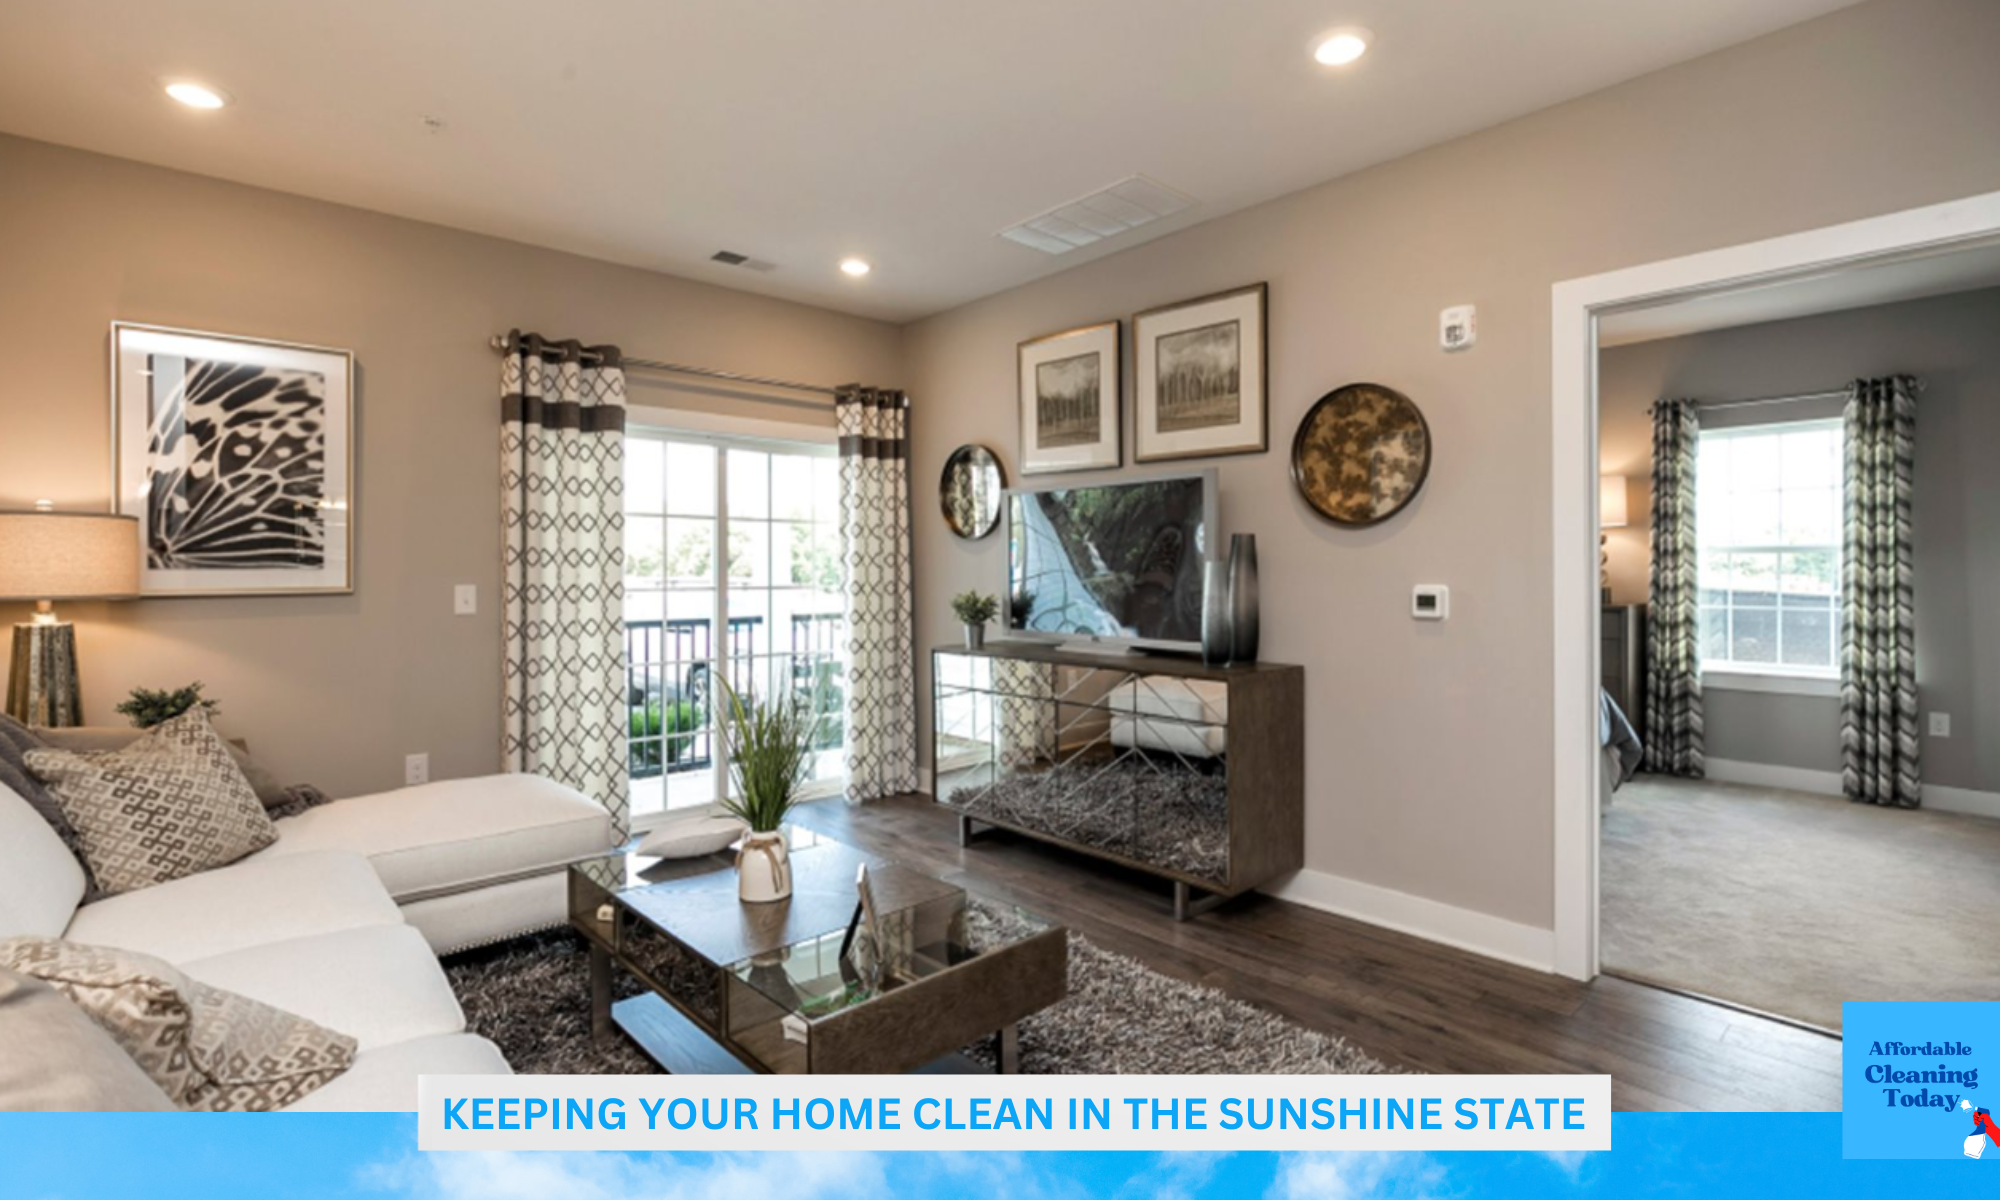 Keeping Your Home Clean in the Sunshine State - Affordable Cleaning Today Hudson Fl 34669